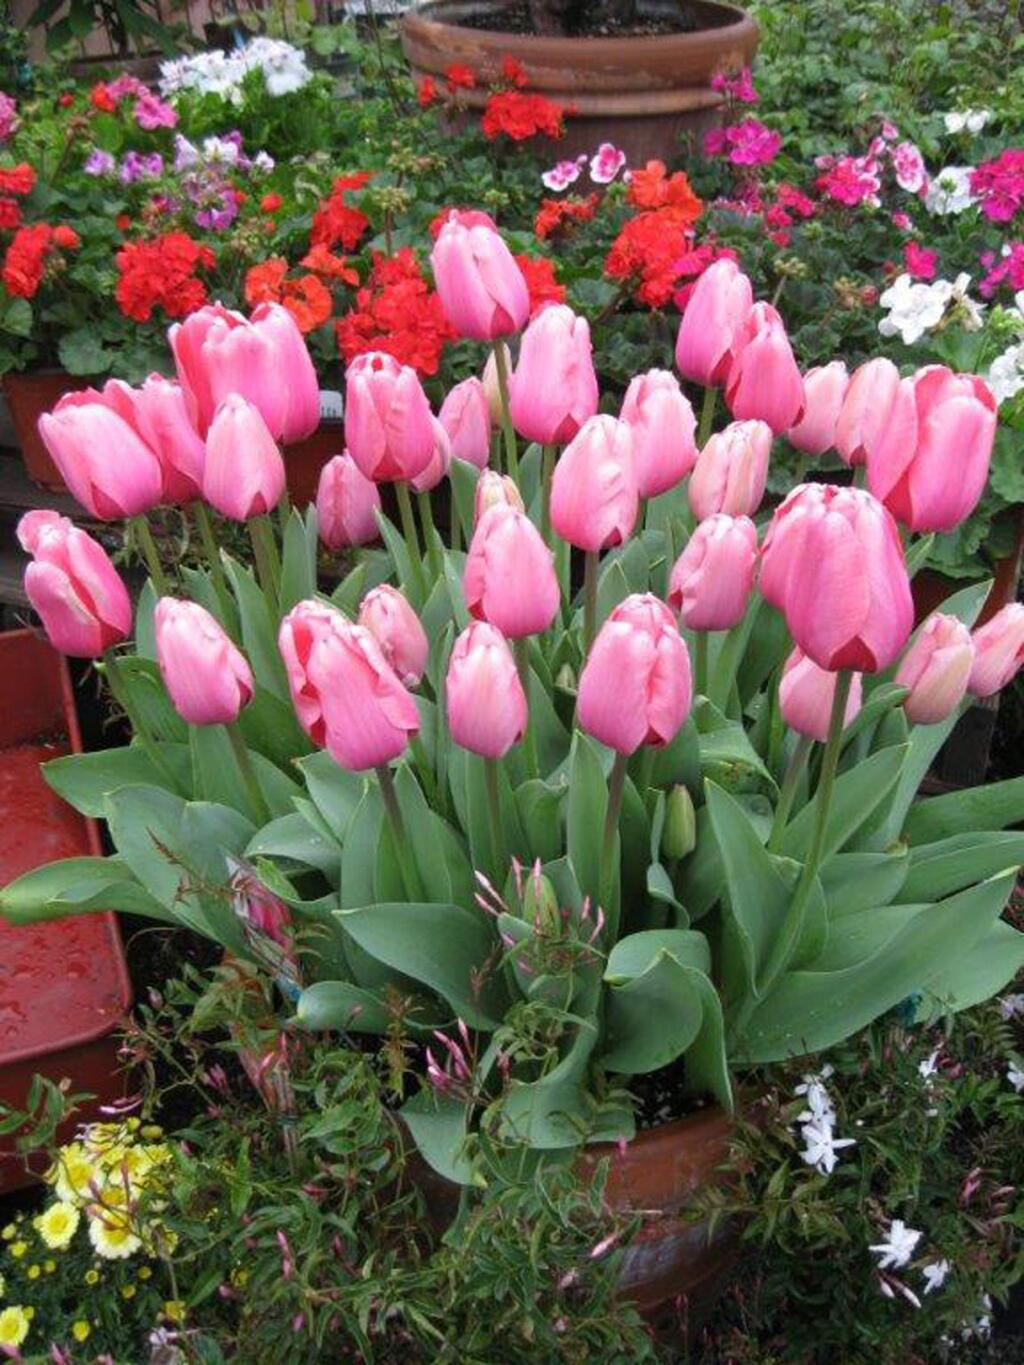 Kings Flower NurseryPink Impression Tulips with geraniums in the background and pink jasmine along the front.